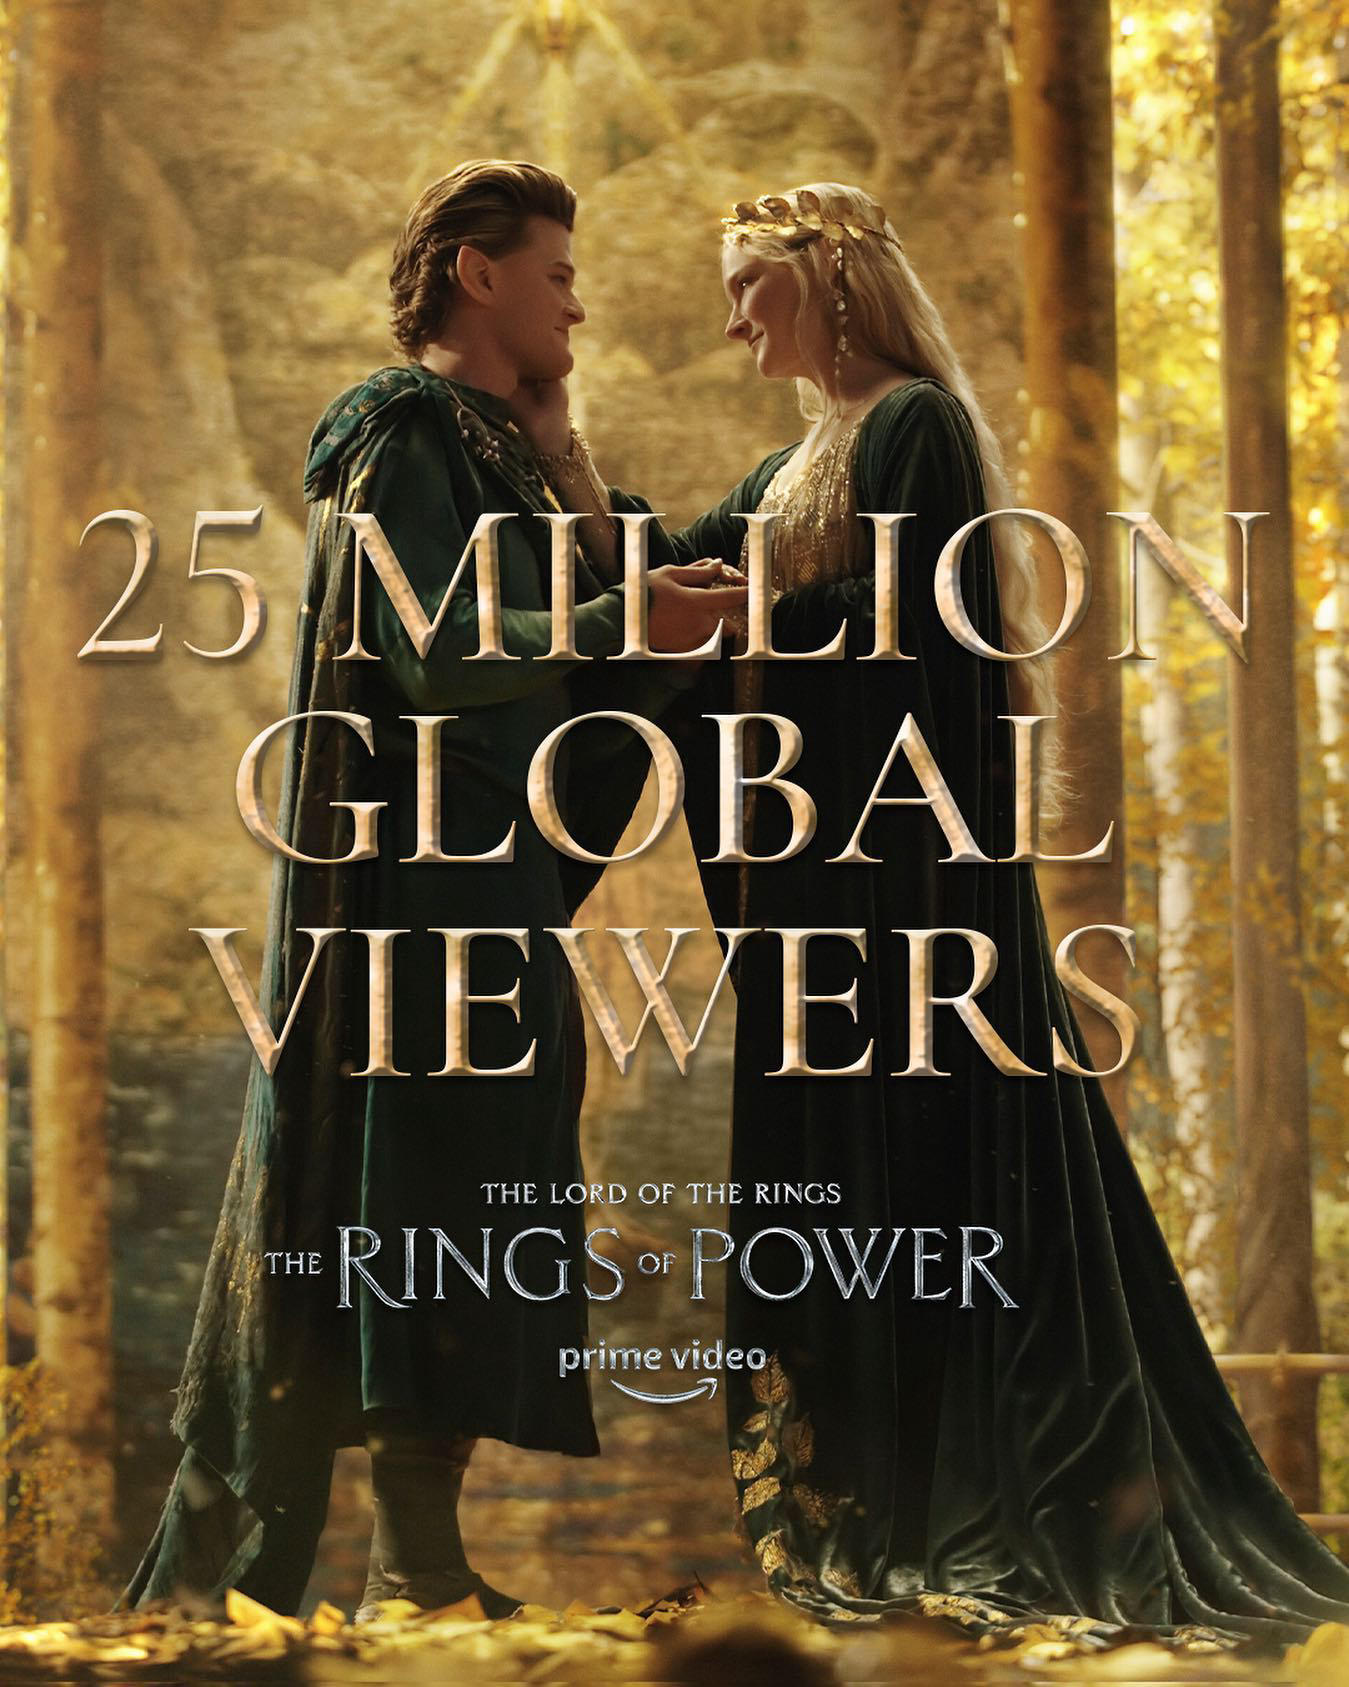 Prime Video - 25 million global viewers in the first 24 hours